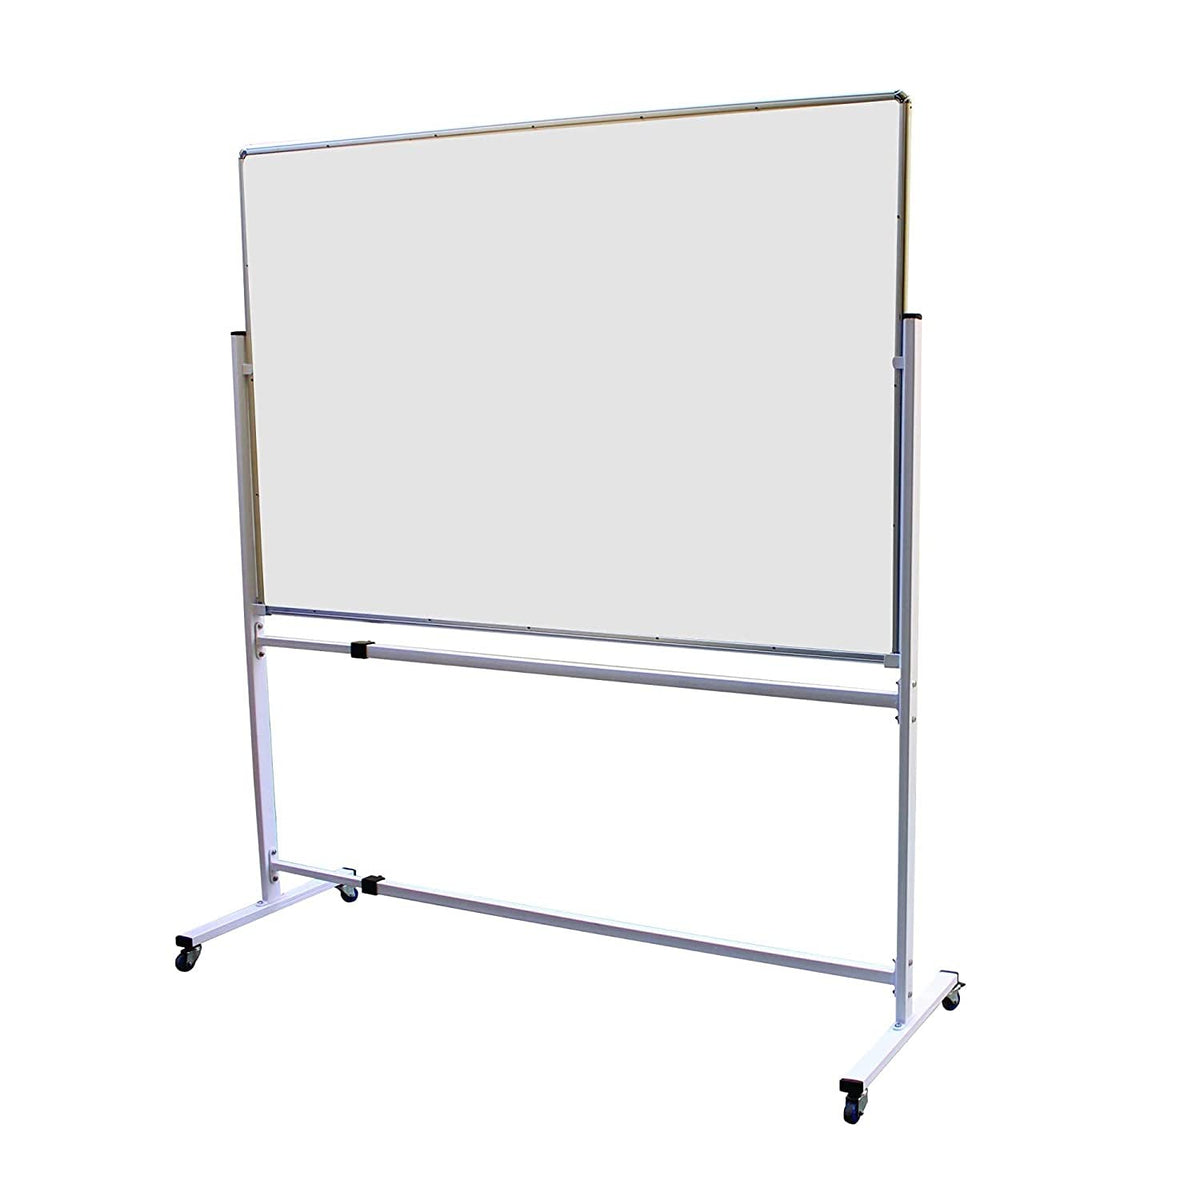 OBASIX® Superior Series White Board 4x6 Feet (Non-Magnetic) | Heavy Aluminium Frame with Movable and Adjustable Whiteboard Stand SMWBWS120180